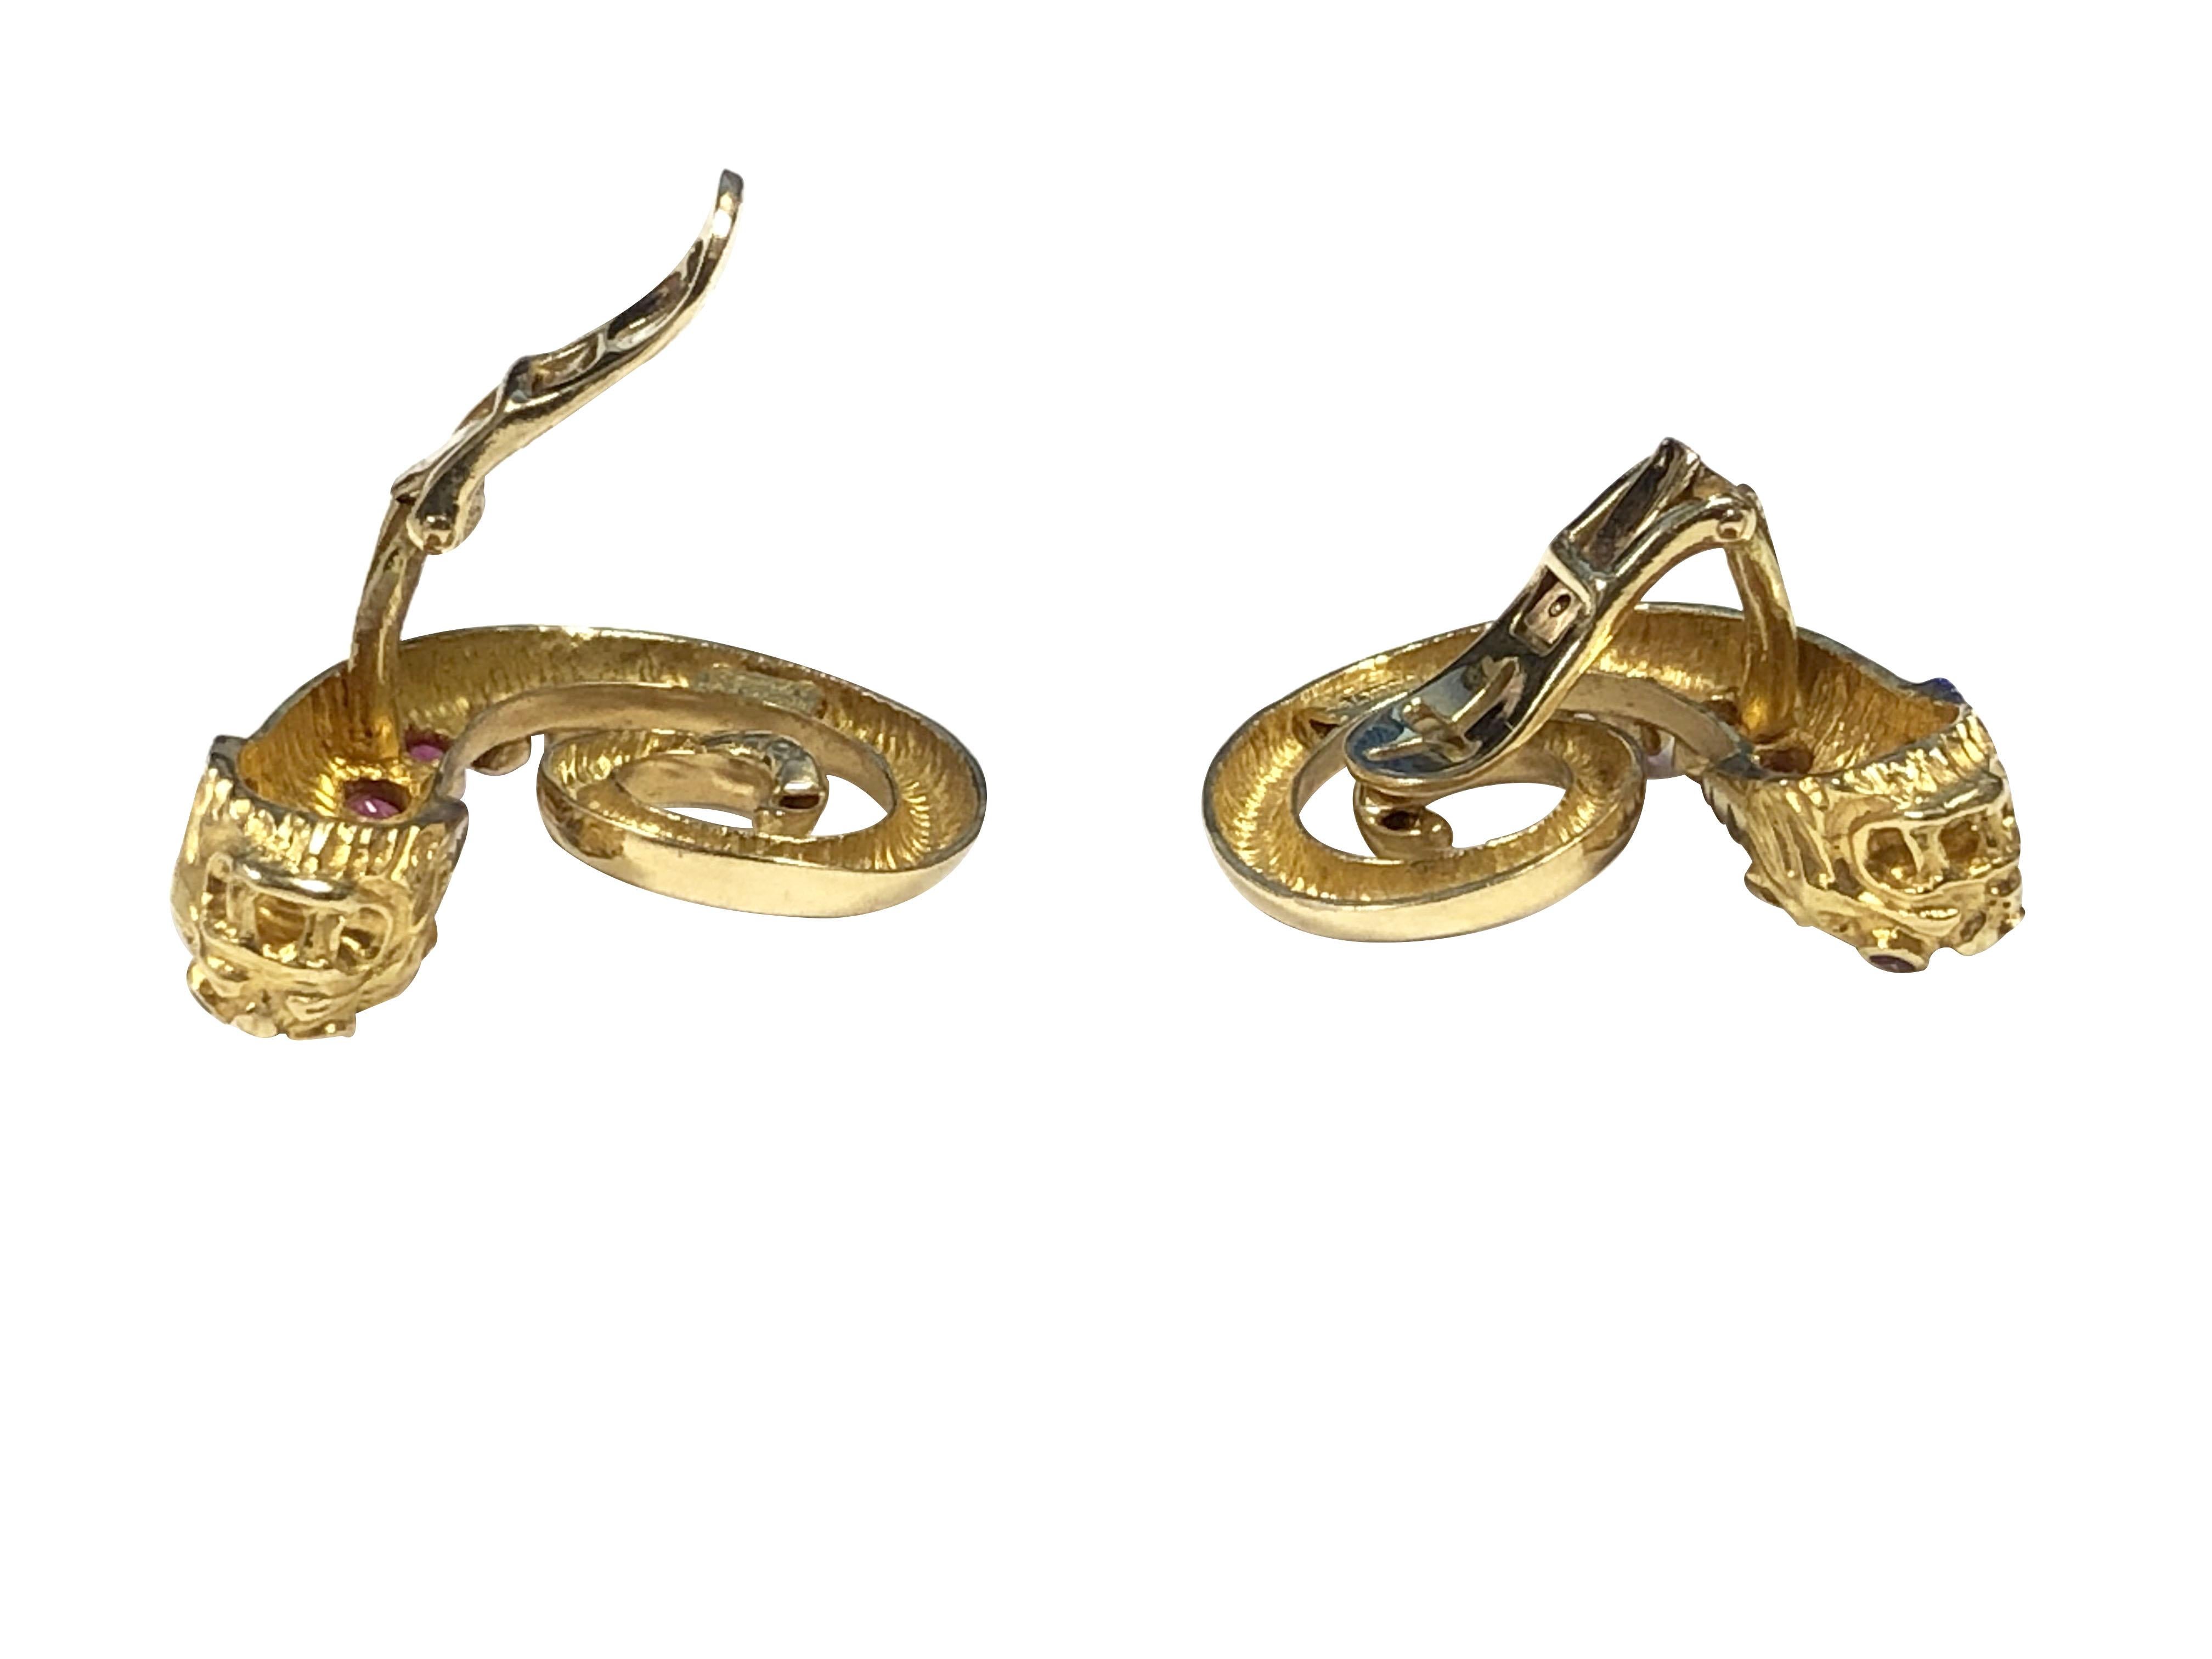 Circa 1980s Ilias Lalaounis 18K Yellow Gold Chimera Head Earrings, measuring 1 1/4 X 1 inch, finely detailed and set with Rubies and Diamonds. Clip backs to which a post can be easily added if desired. 